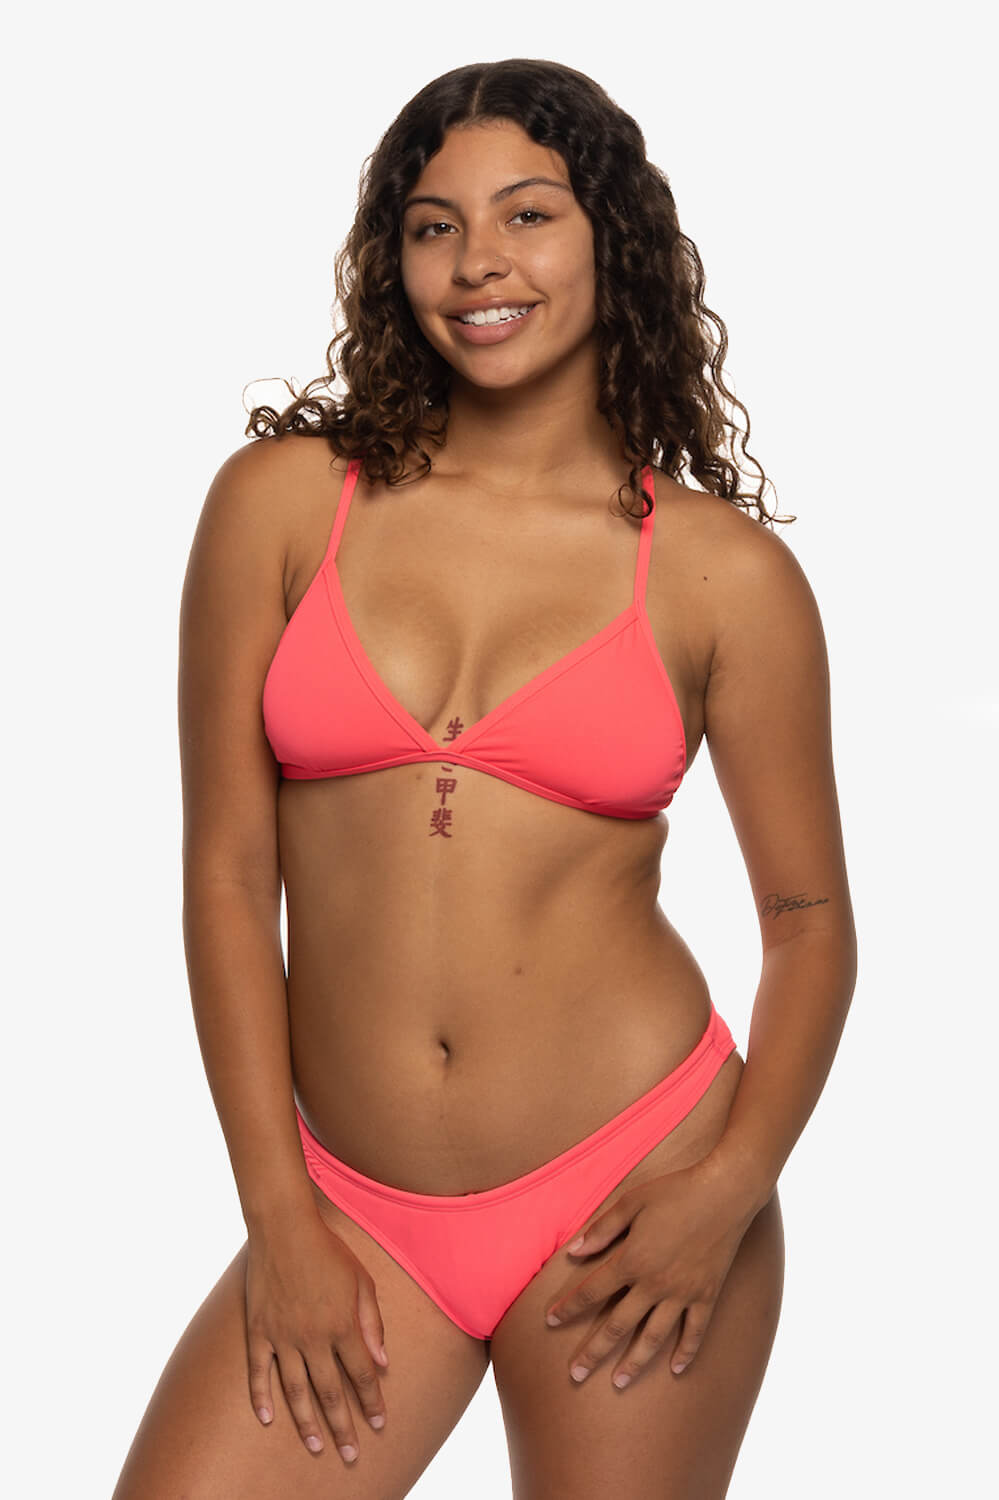 https://cdn.shopify.com/s/files/1/0703/0099/products/Swim-Bottoms_Jenna_Solid_Hot-Pink_HP_Front_Aysia_062422_1120x.jpg?v=1656479125